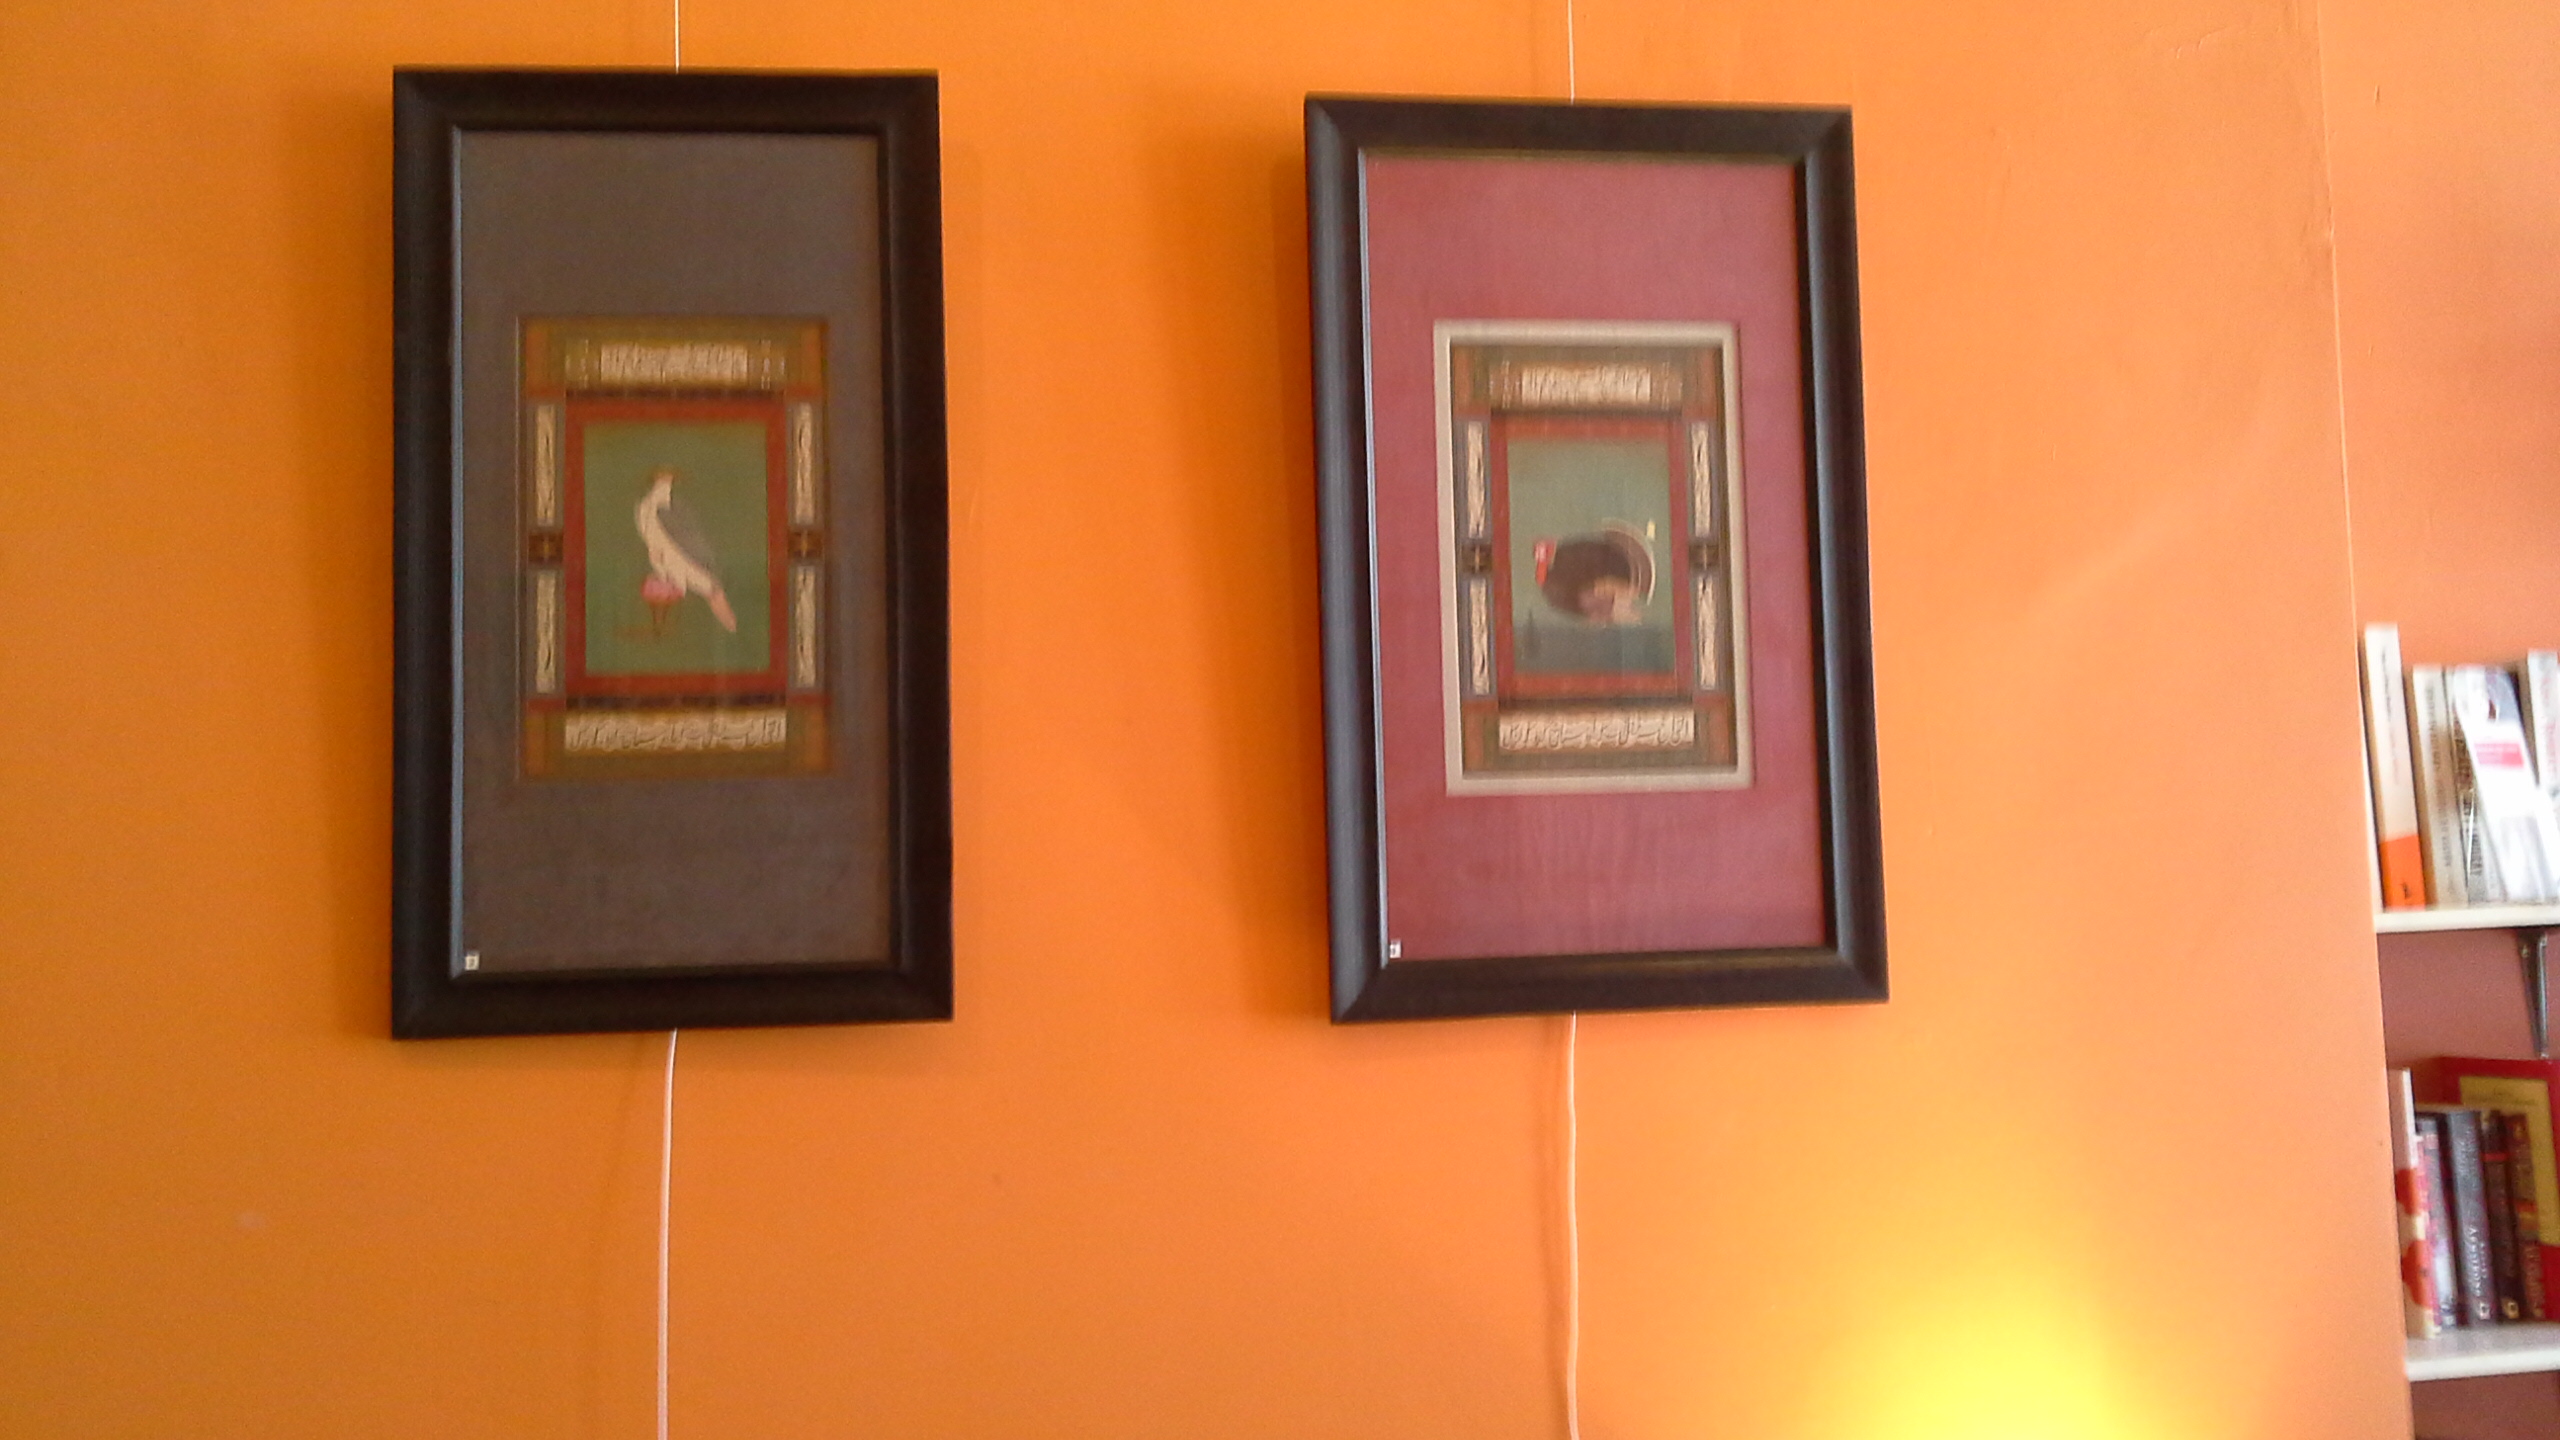 Exhibition of Indian Art at the Rustique Cafe